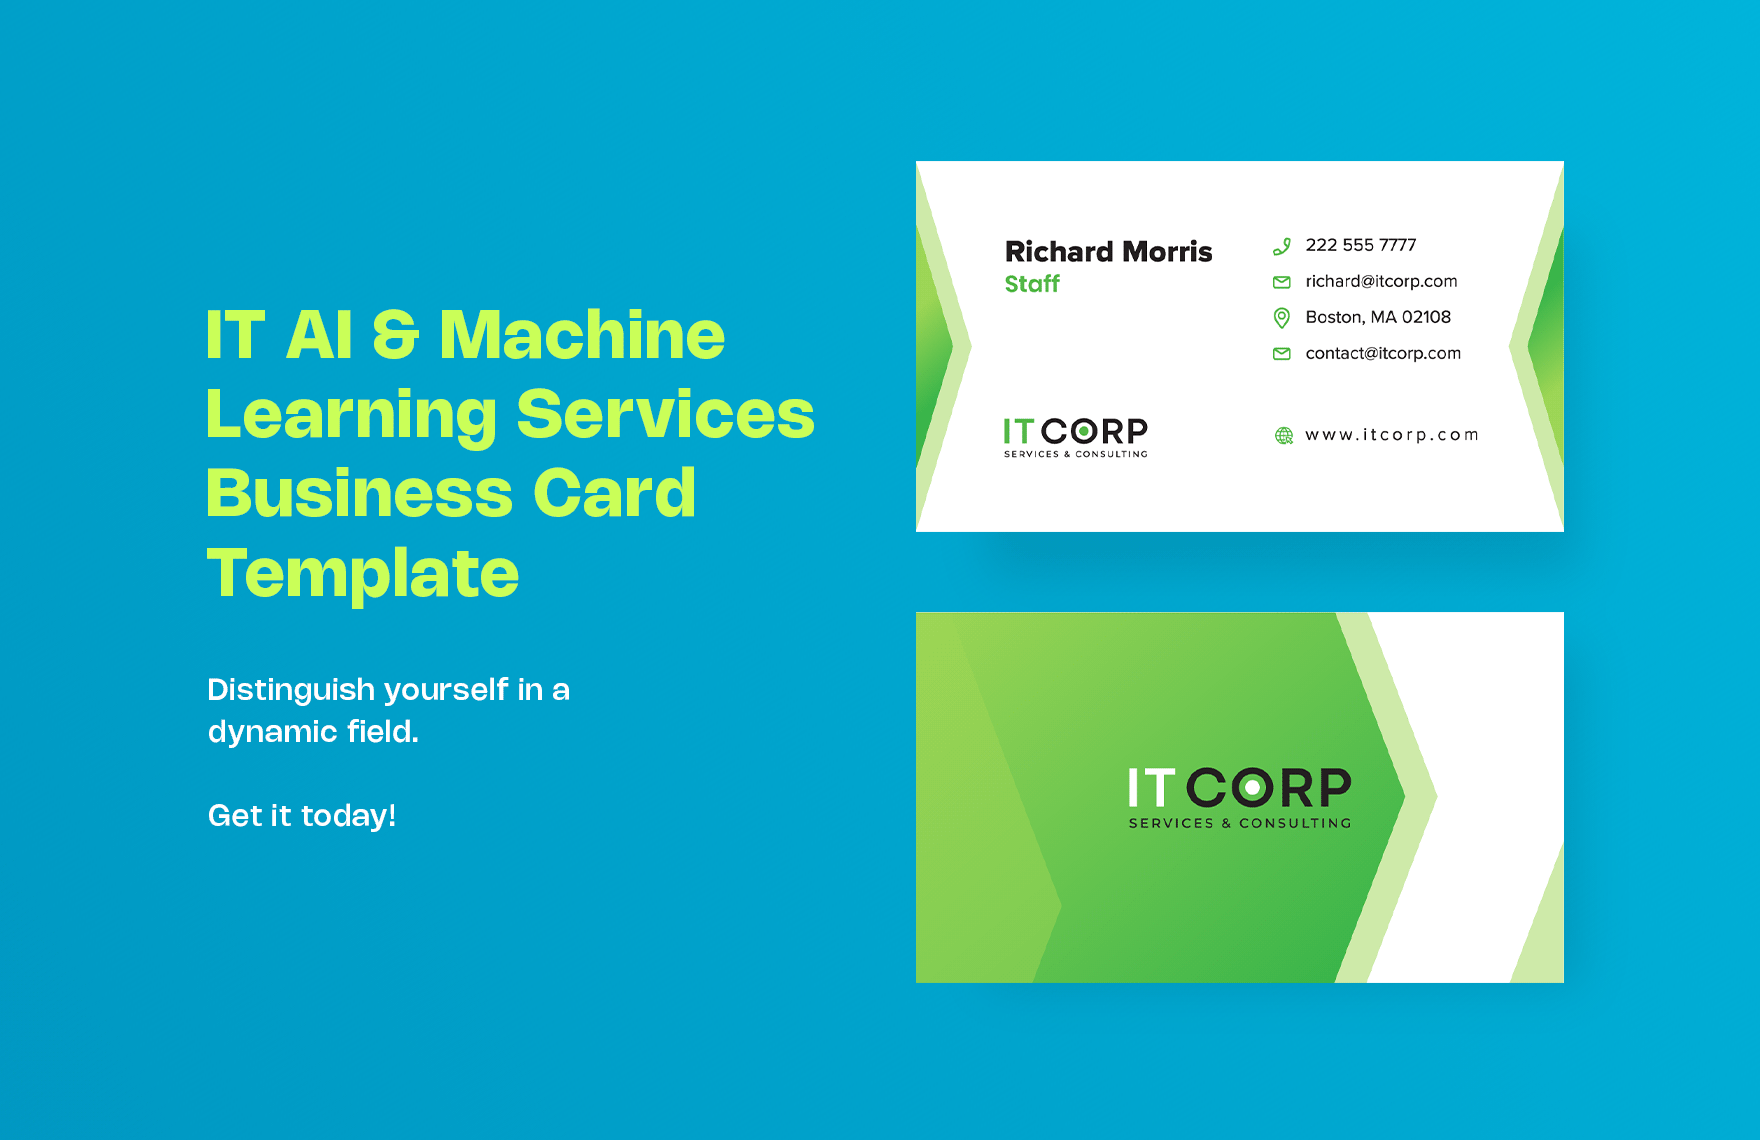 IT AI & Machine Learning Services Business Card Template